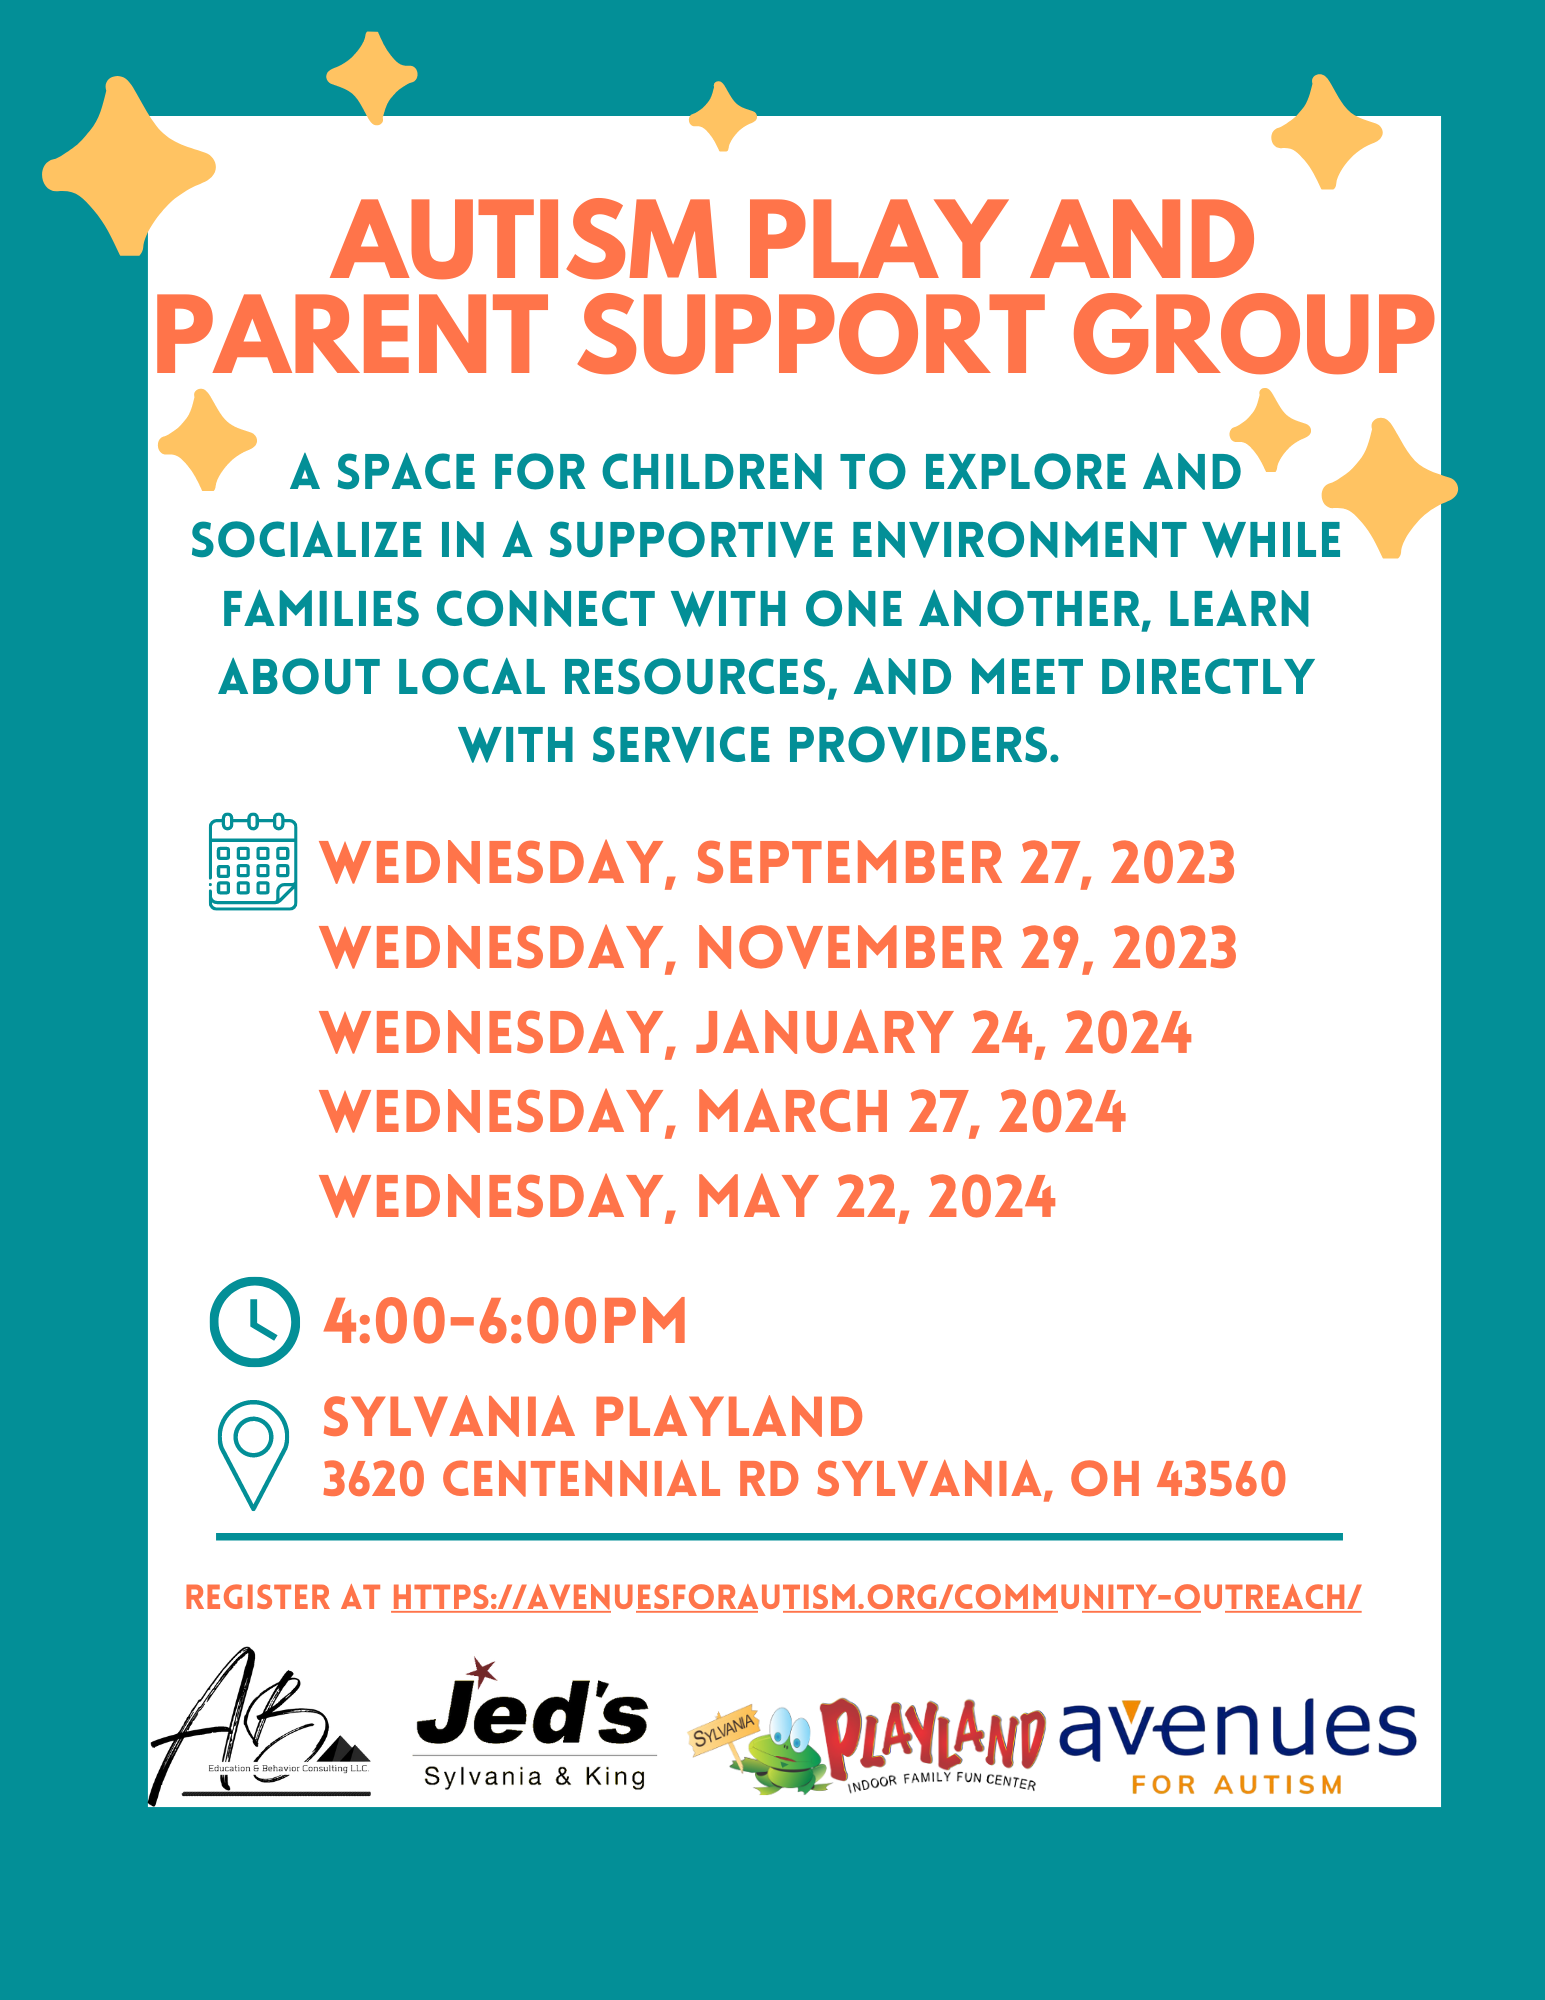 Autism Play and Parent Support Group